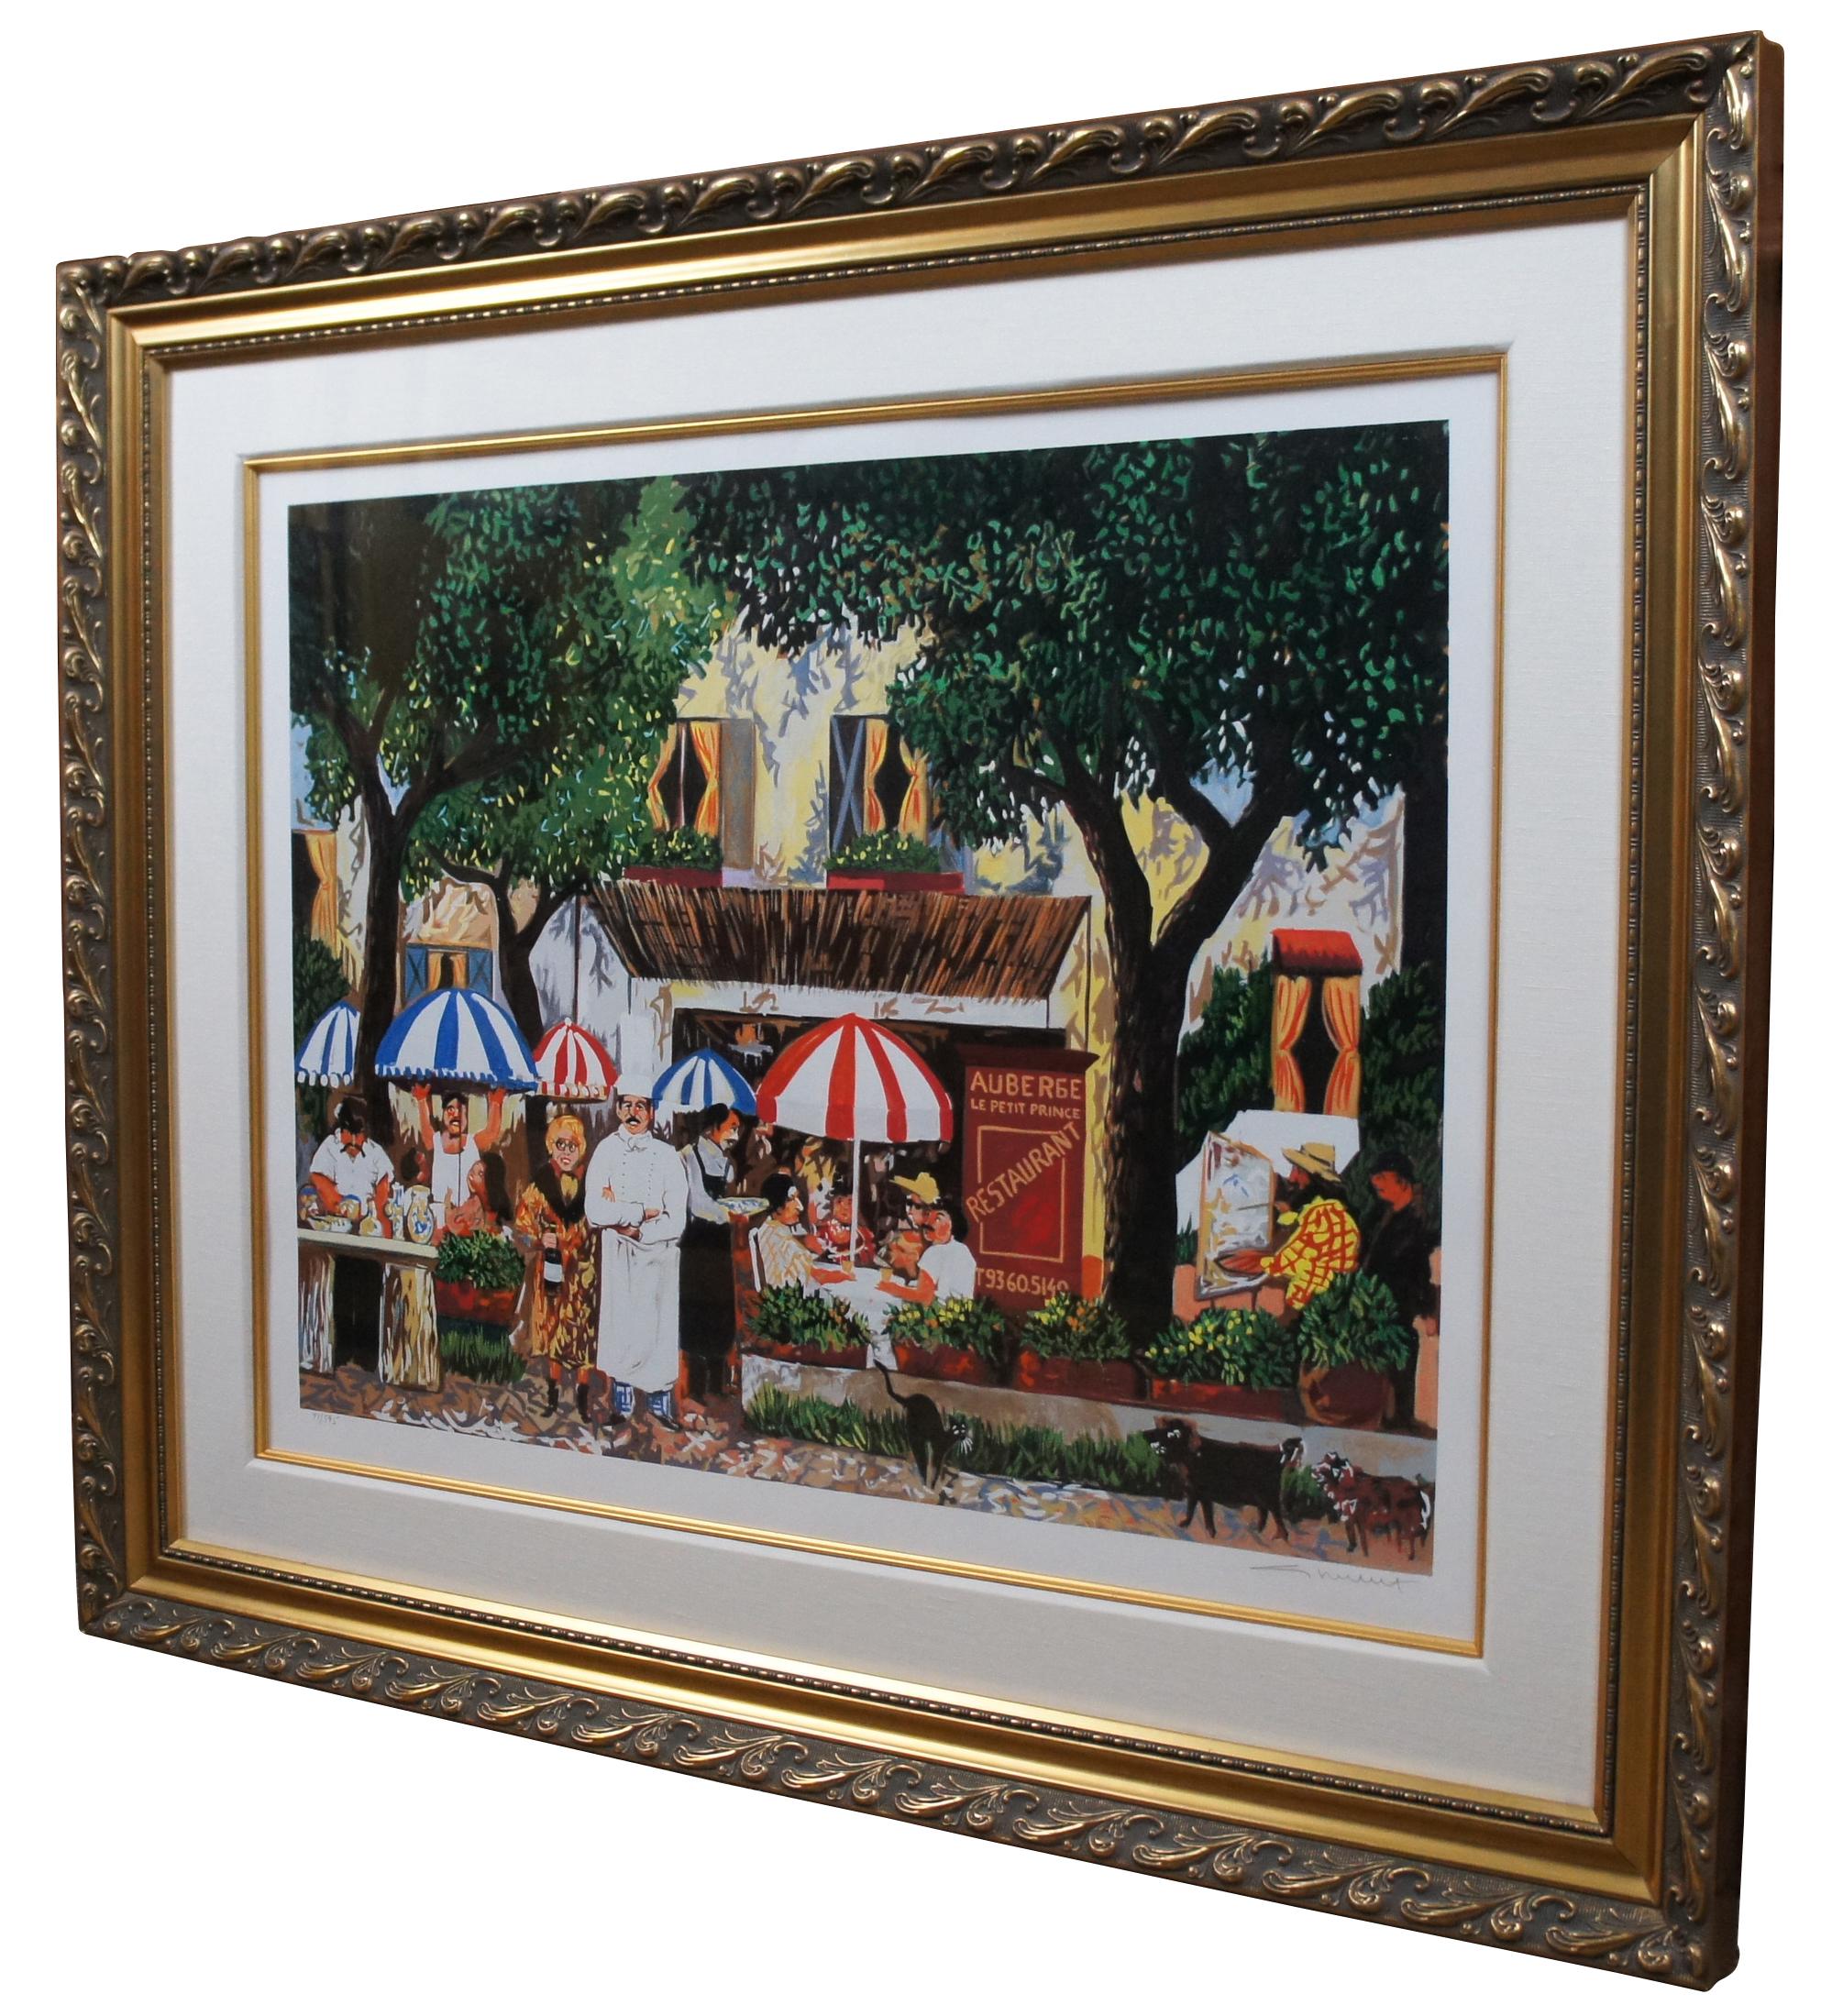 Pencil signed and numbered 77/595 guy buffet serigraph print titled Le Petit Prince, depicting a street scene cityscape of a French restaurant named Cafe Auberge.

Measures: Sans frame 32” x 24”, 43